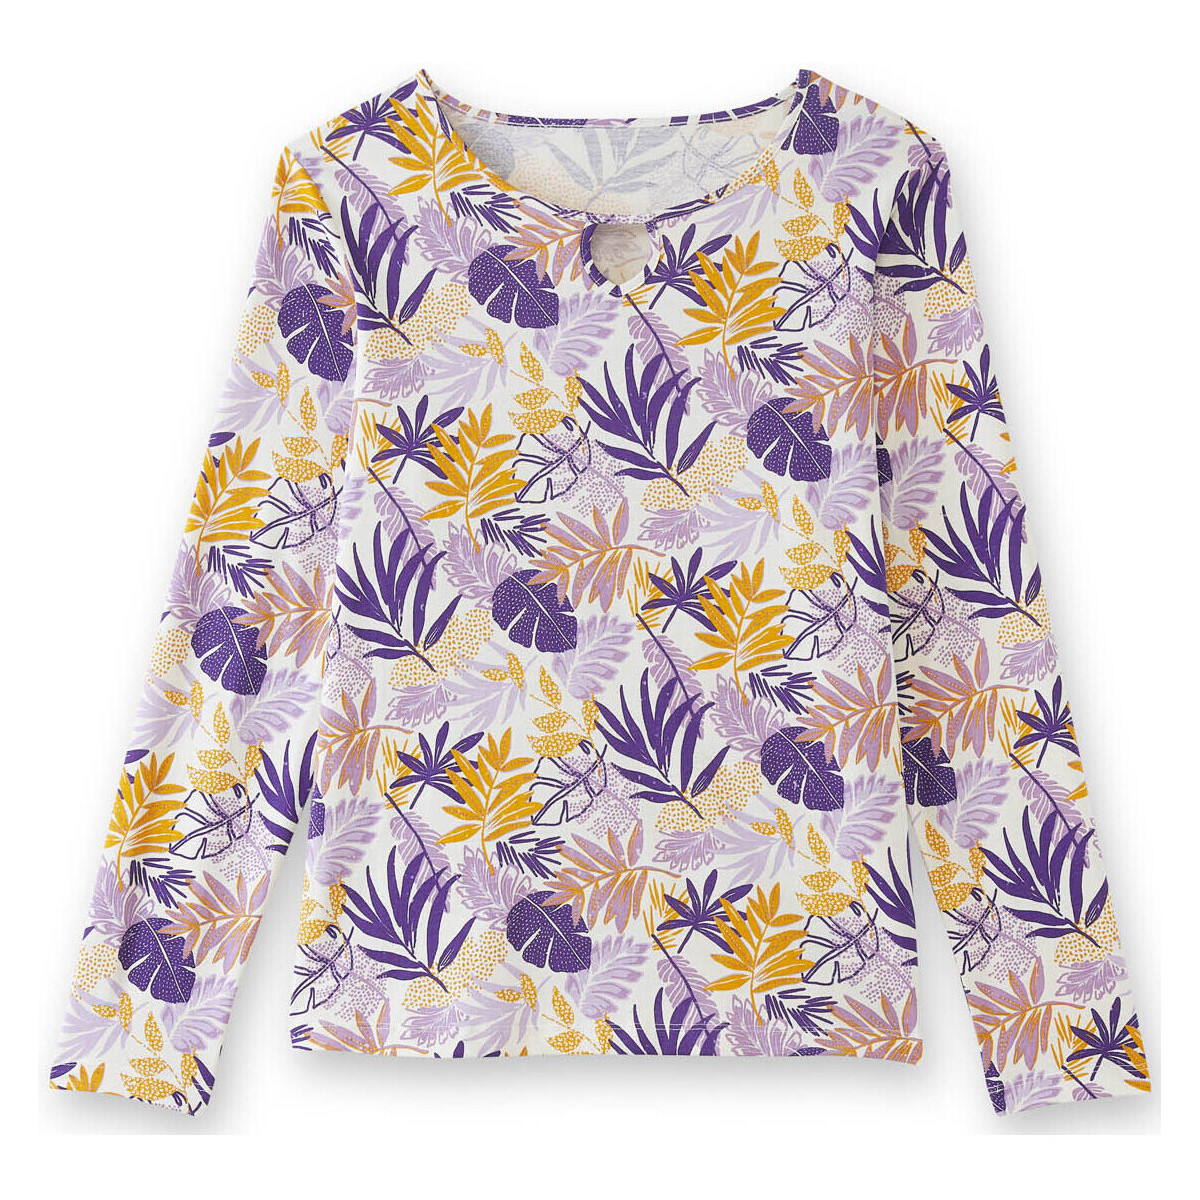 Vêtements Femme For those cooler summer mornings throw on the Vans® Kids Floral V Hoodie and get the day started Daxon by  - Tee-shirt fantaisie Rose